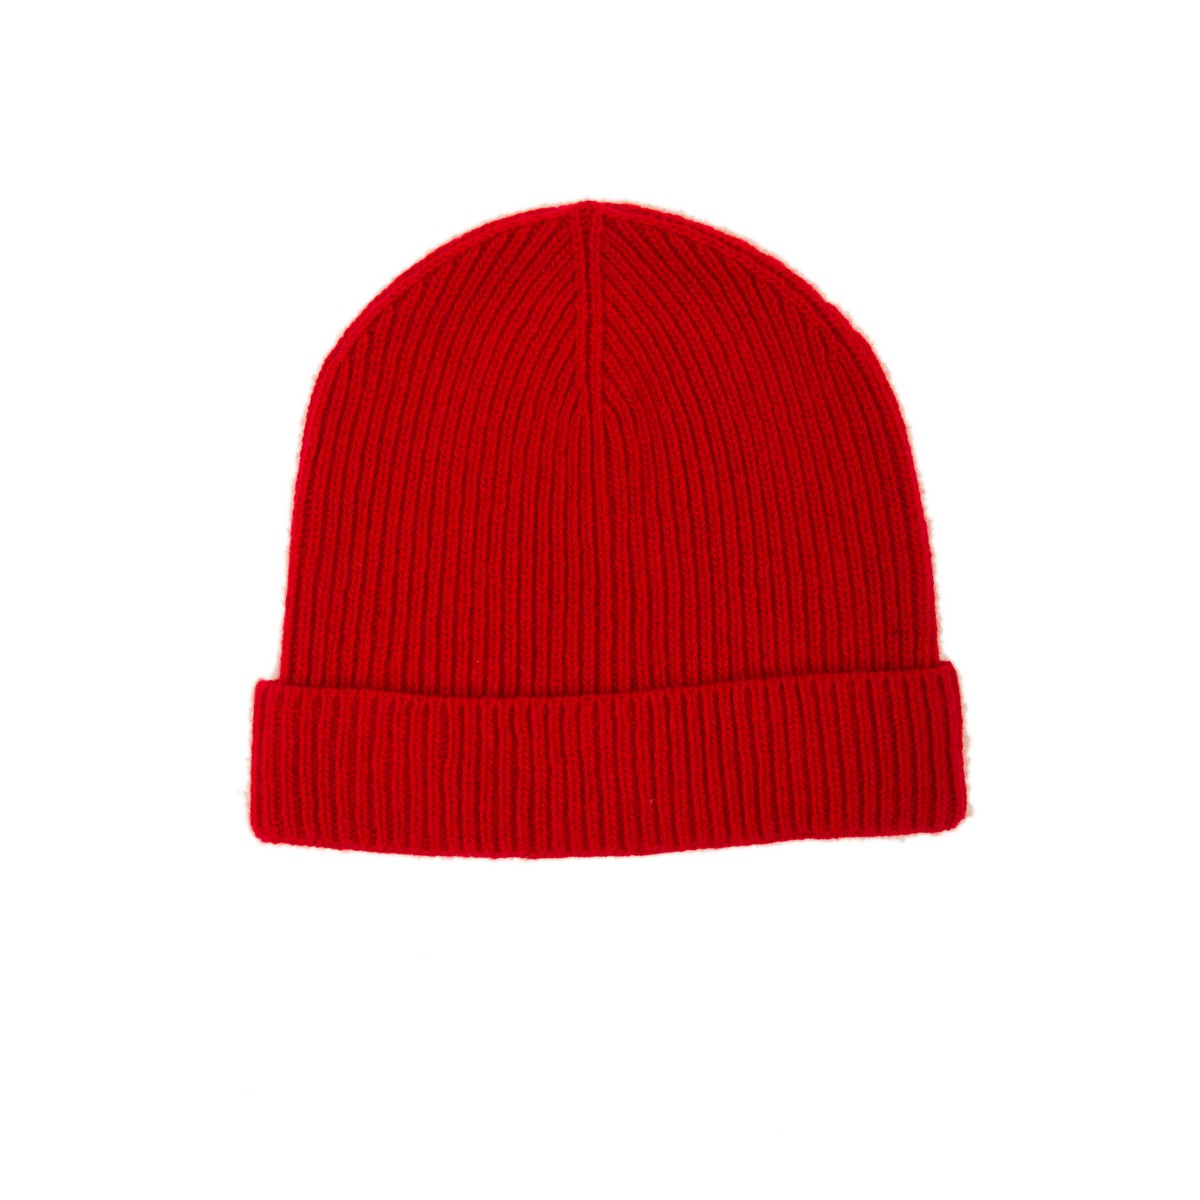 Free Beanie Hat Cliparts, Download Free Clip Art, Free Clip.